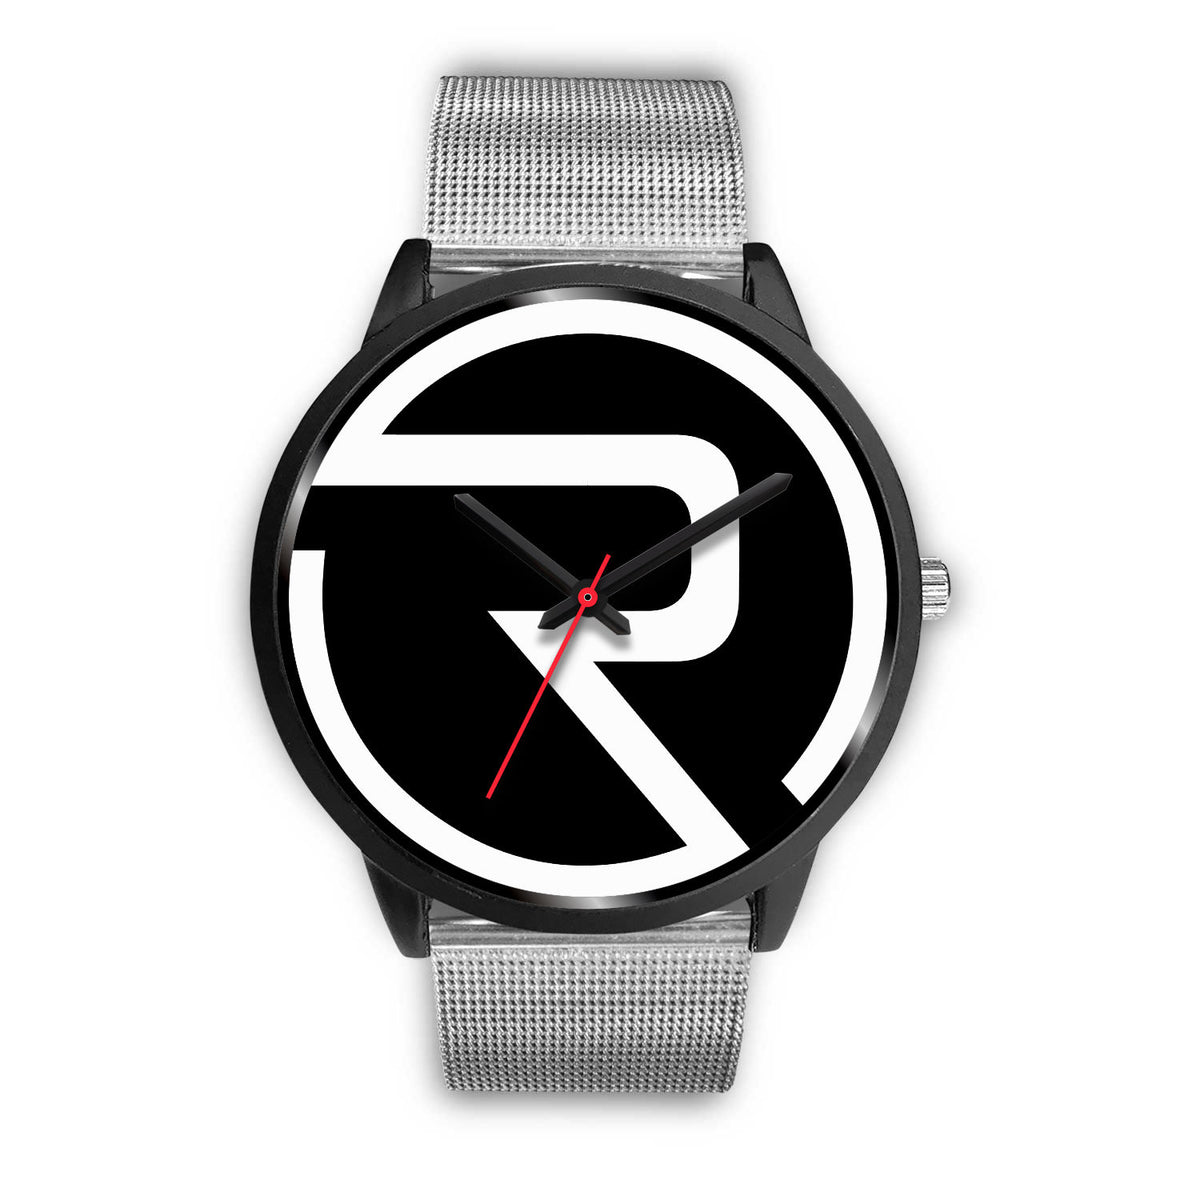 Pendant Watch - Ruthless Paintball Products